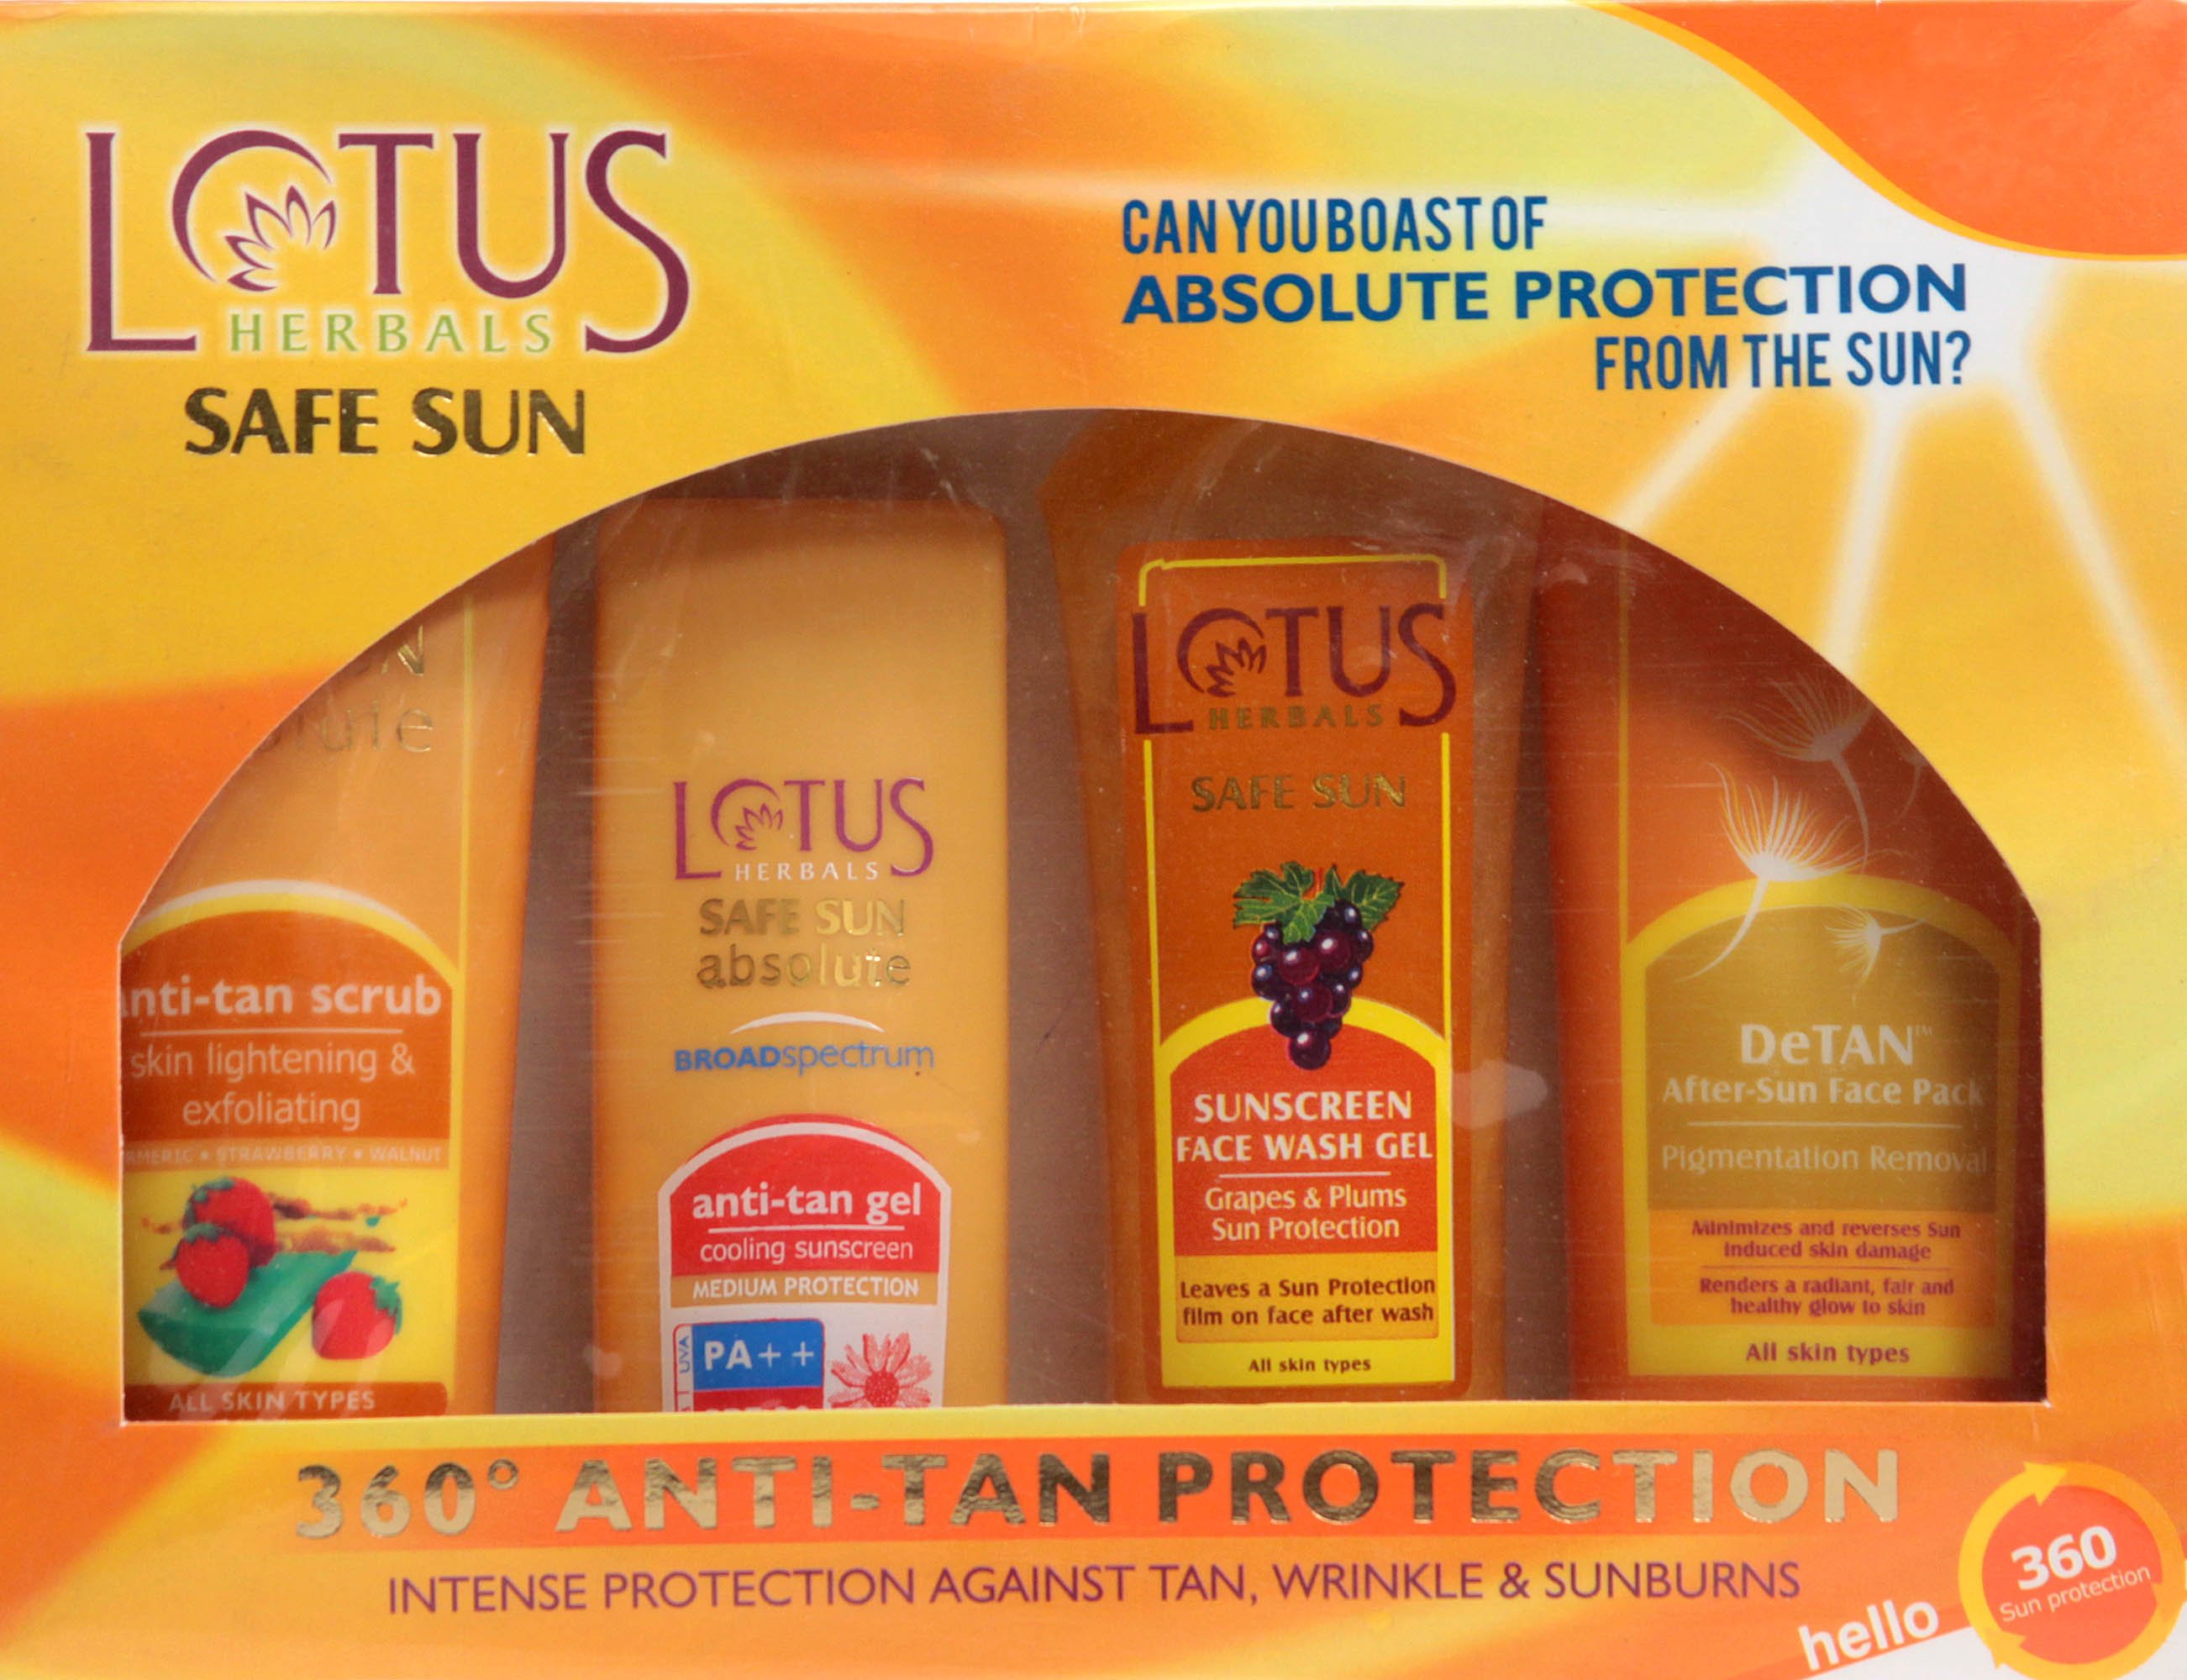 Safe Sun 360 Anti-Tan Protection: Intense Protection Against Tan Wrinkle & Sunburns - book cover